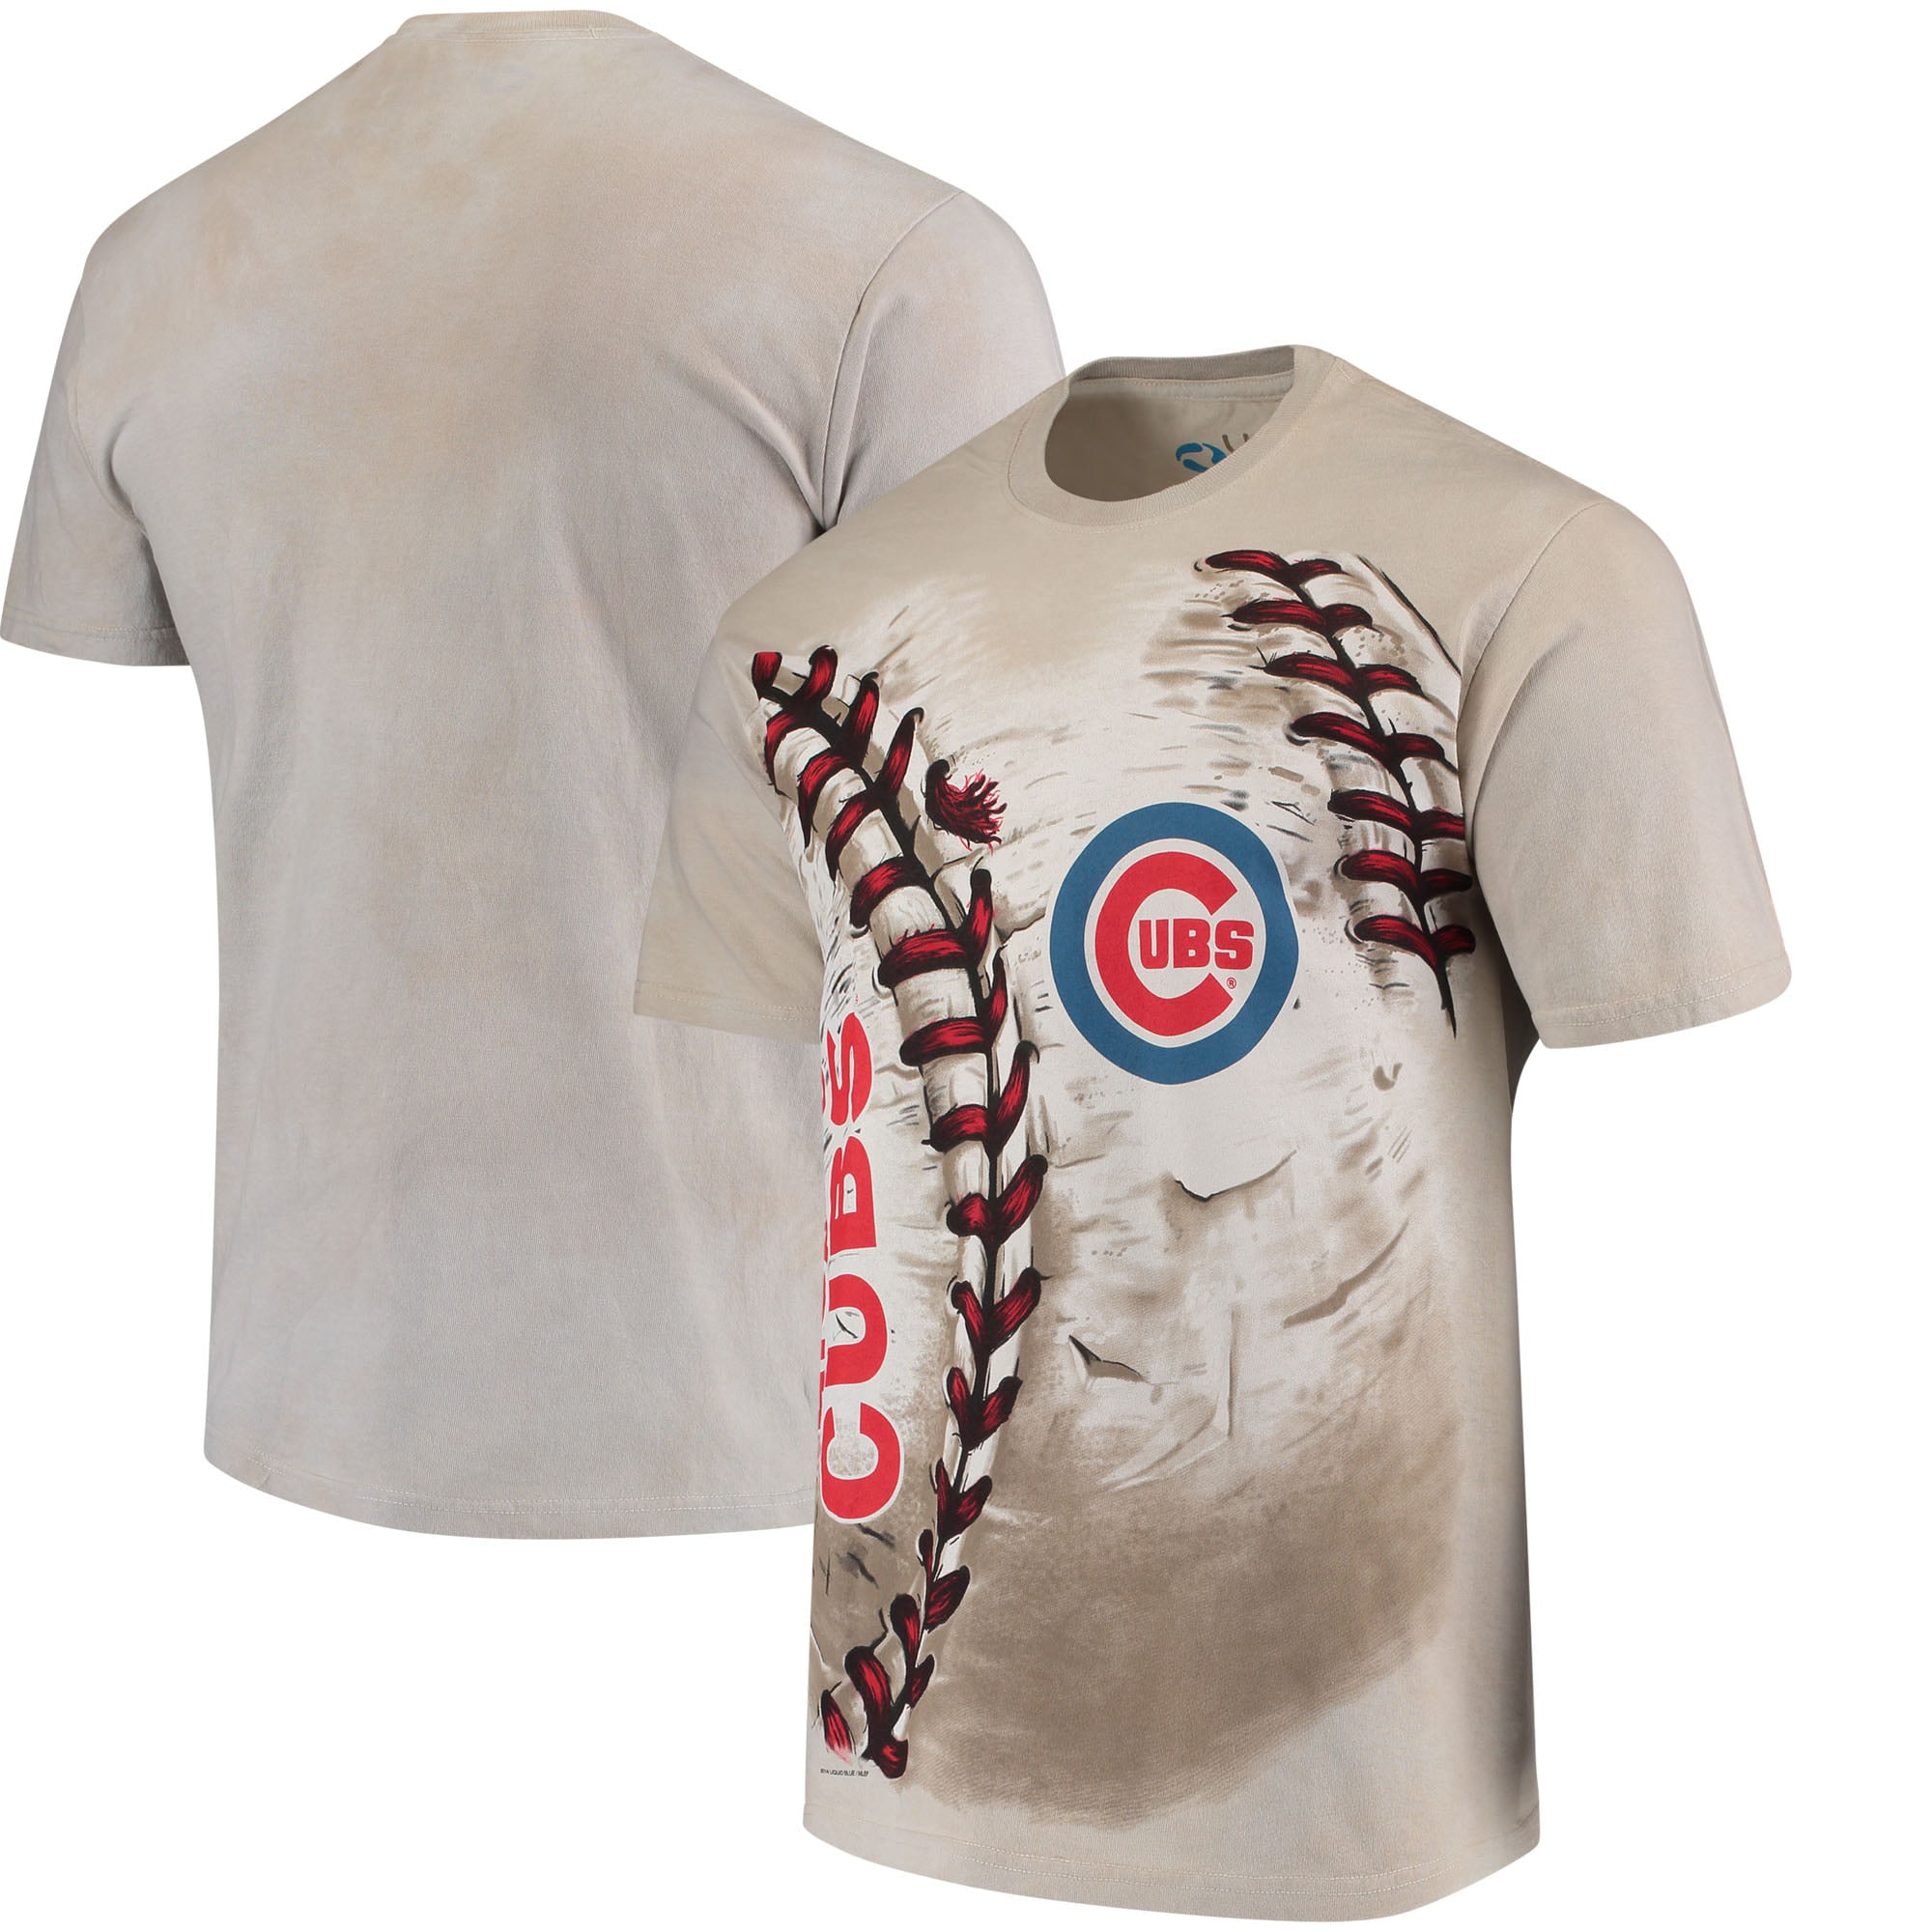 Tie Dye Chicago Cubs World Series Champions T-Shirt